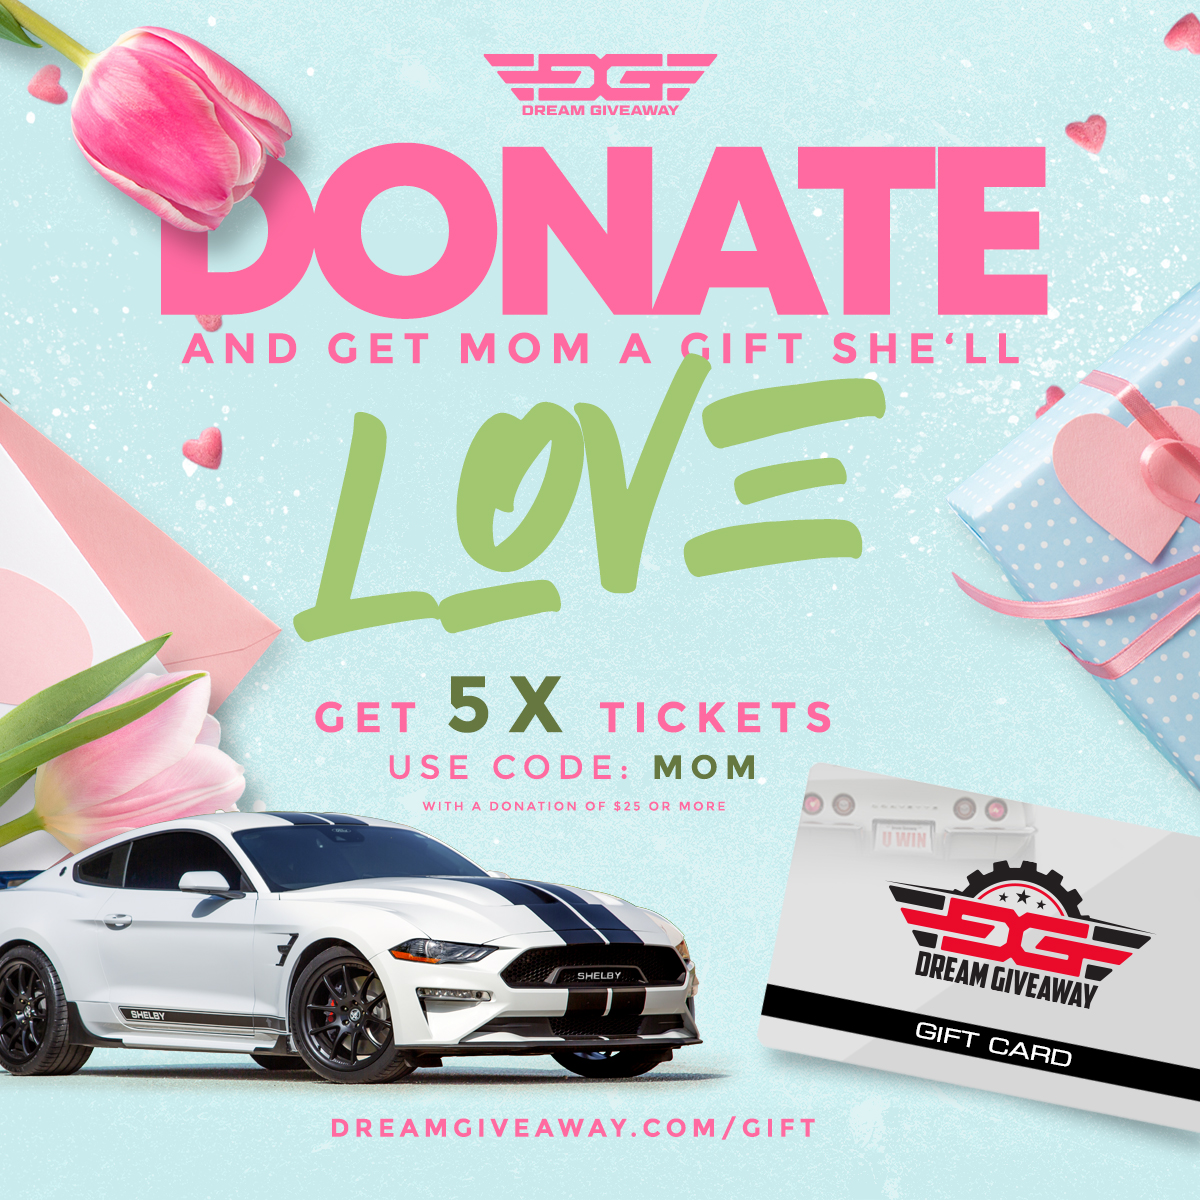 Need a gift for the #Mom in your life? Show mom and charities love when you donate and get an e-gift card good for entries into ANY Dream Giveaway! Use promo code MOM to load 5x tickets to the e-gift of $25! Visit: dreamgiveaway.com/gift #Mothersdaygifts #Mom #promocodeMOM